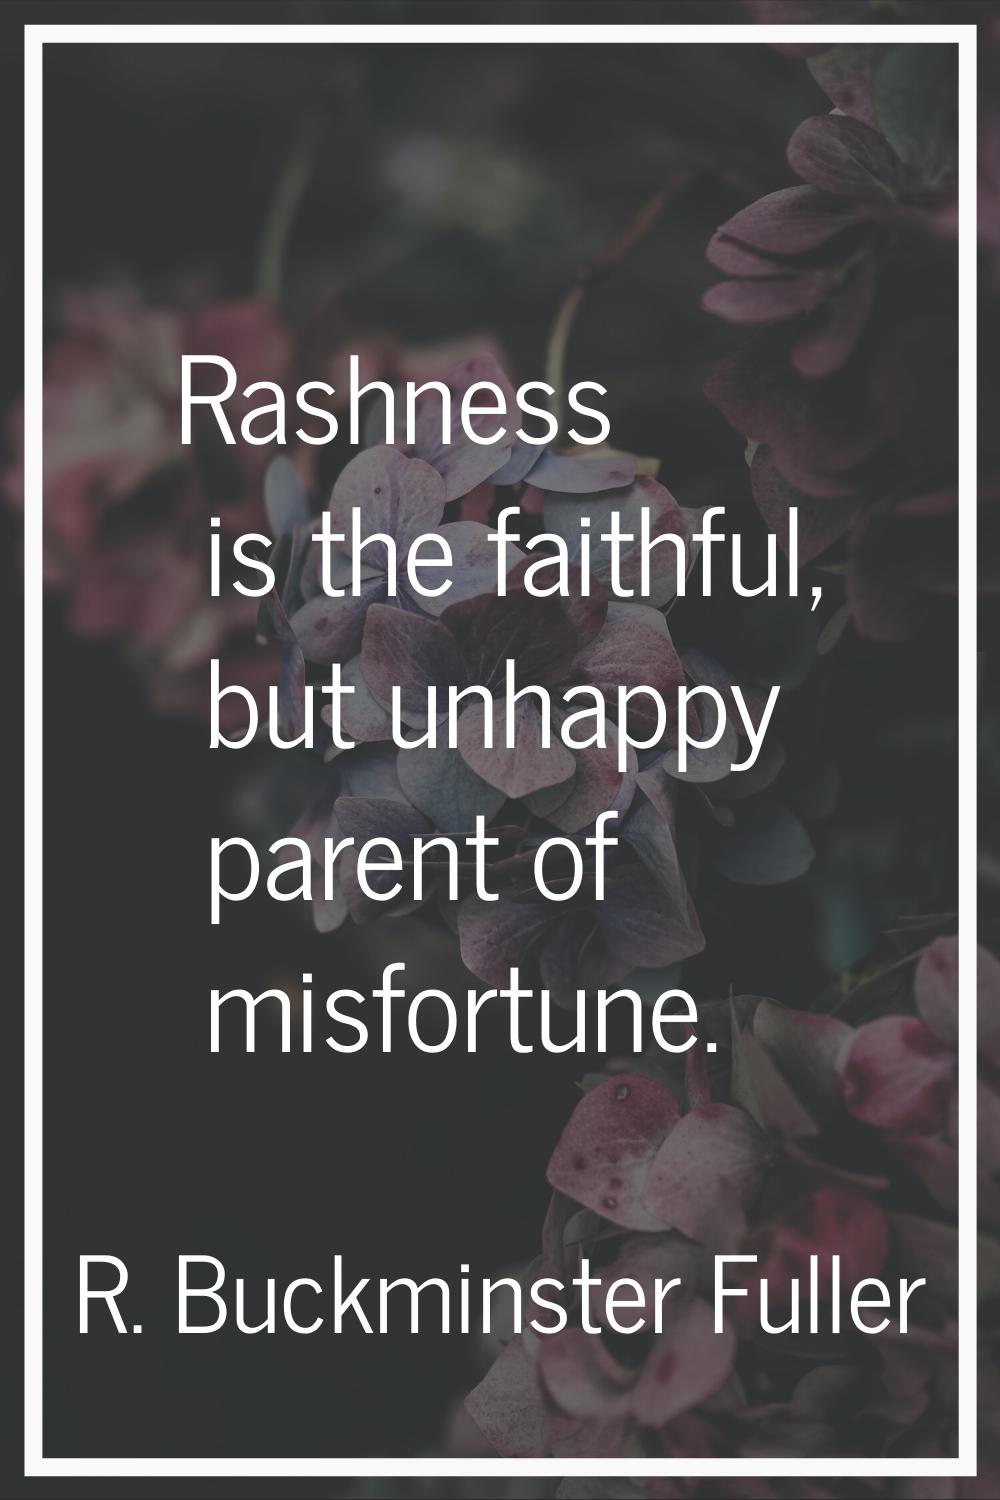 Rashness is the faithful, but unhappy parent of misfortune.